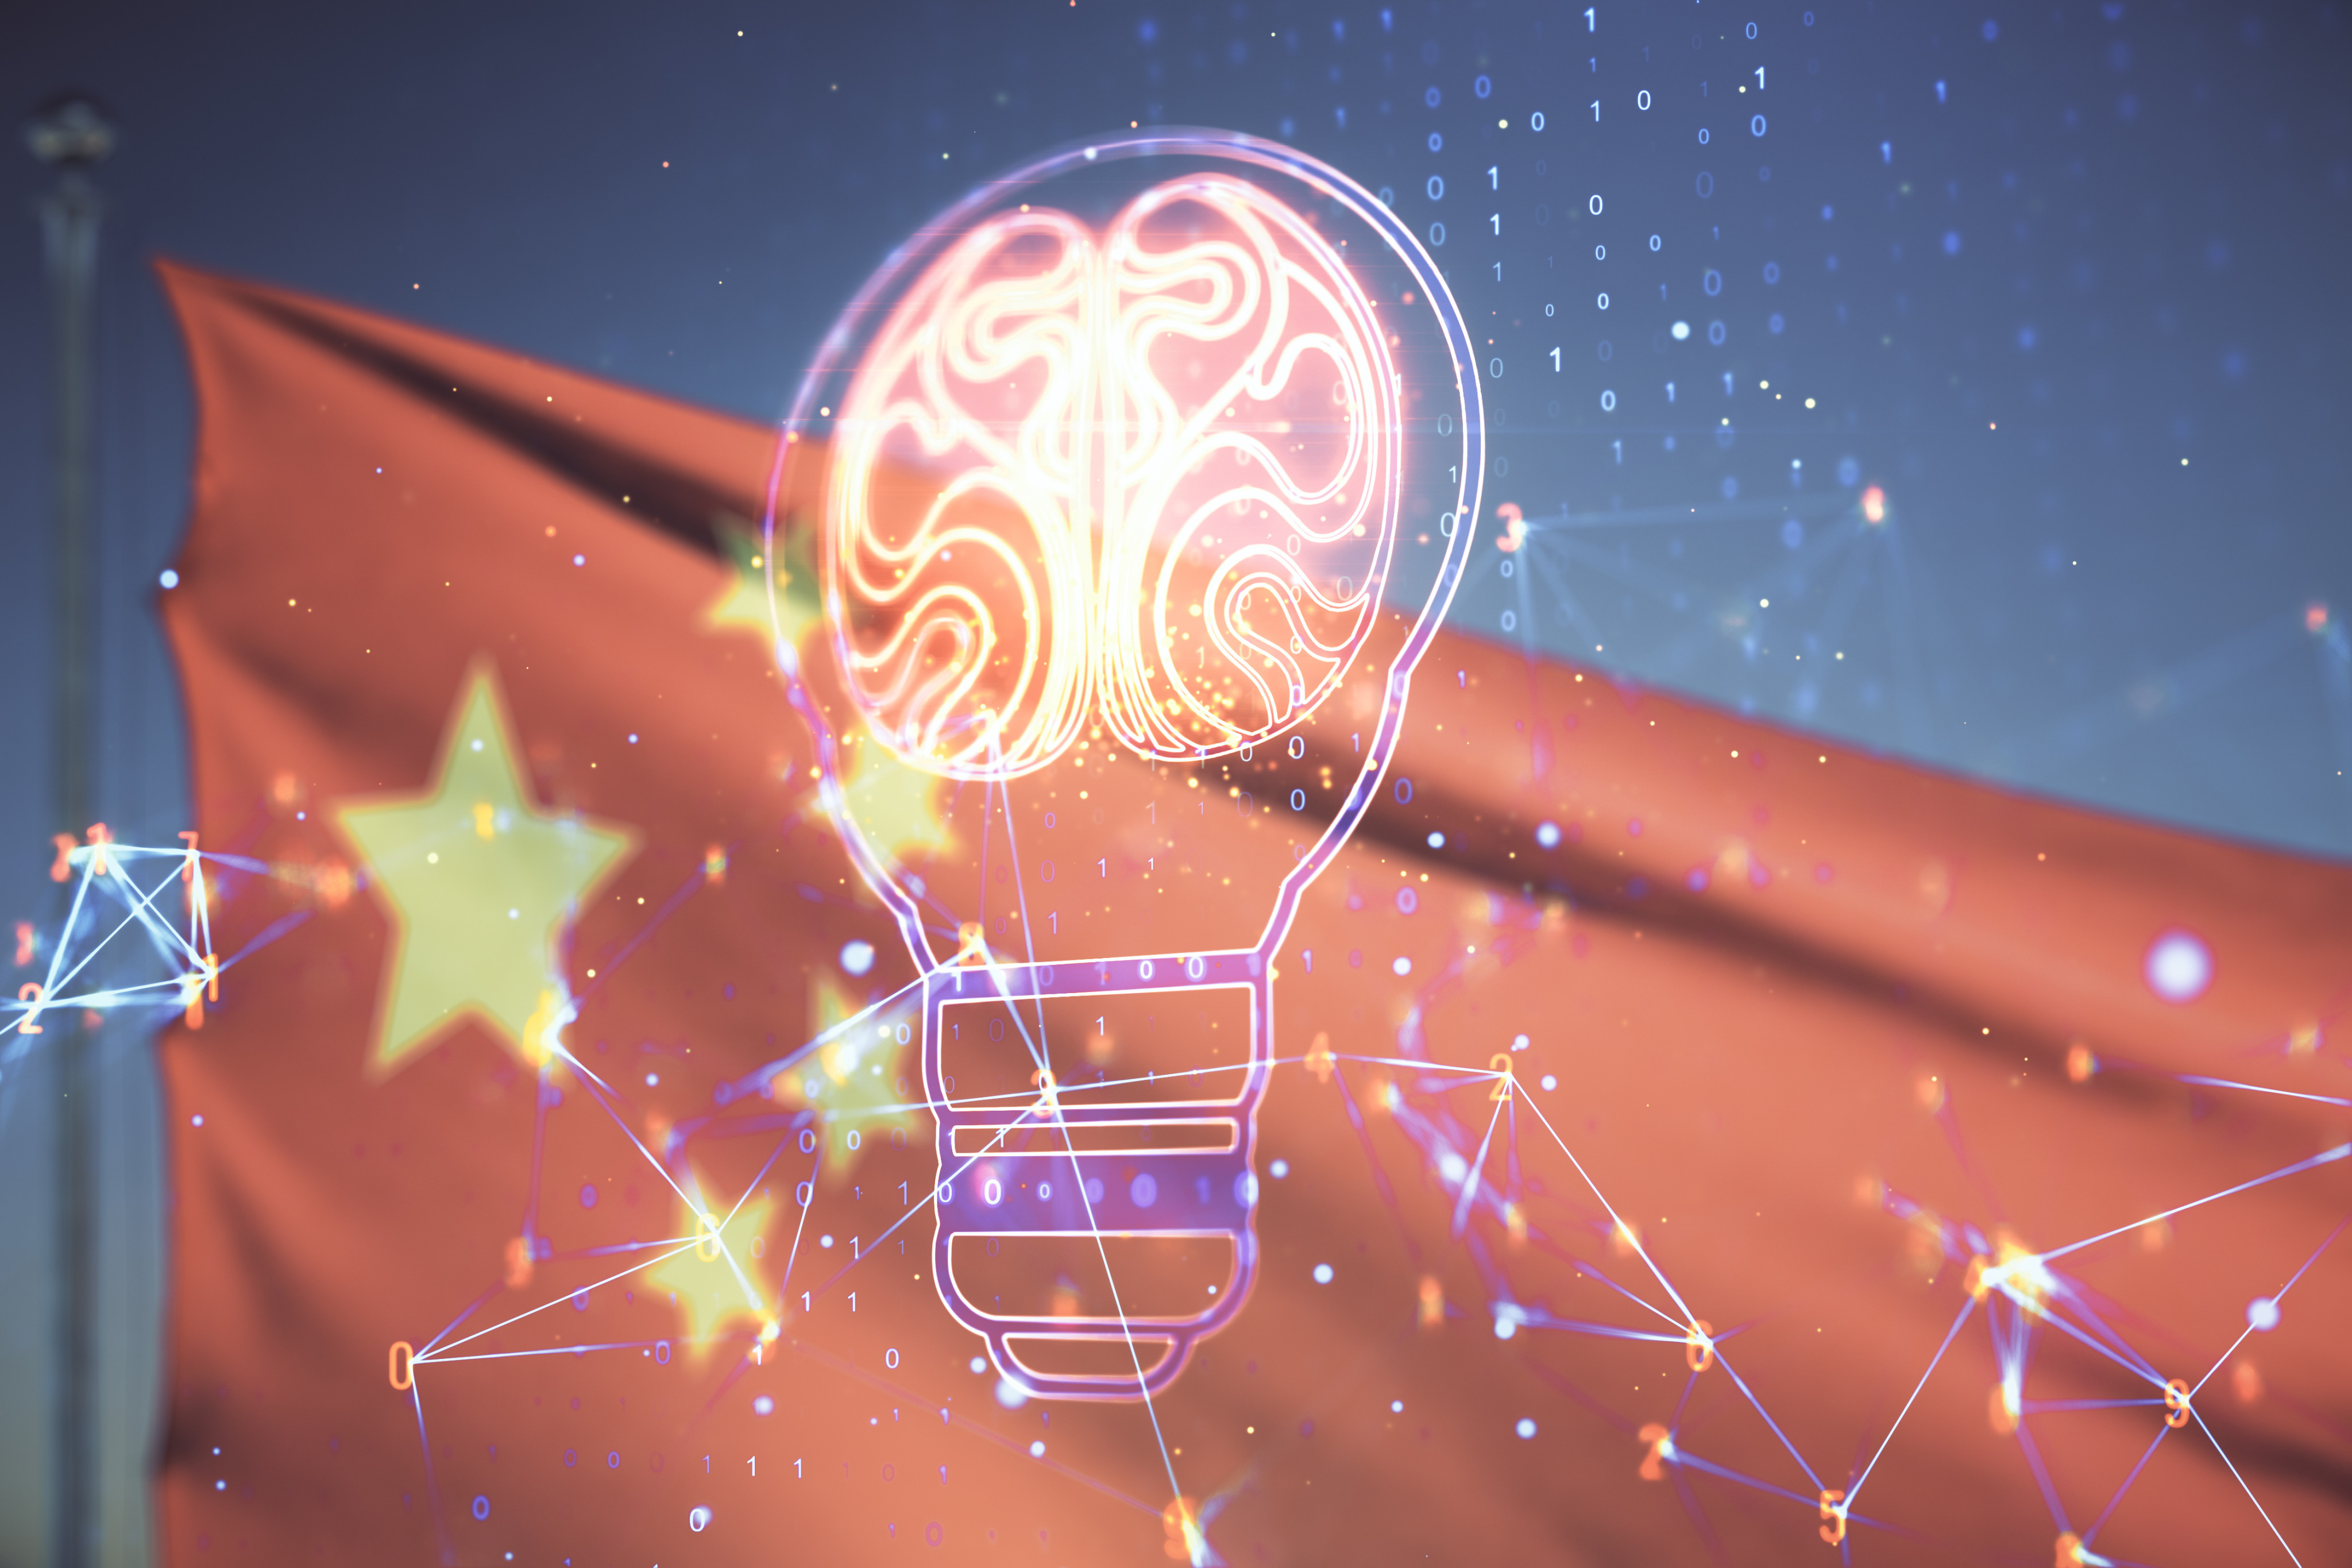 The People’s Daily op-ed piece reflects China’s big bet on generative artificial intelligence as a strategic tool that would help save a national economy saddled by debt, a sluggish post-coronavirus recovery and demographic challenges. Image: Shutterstock